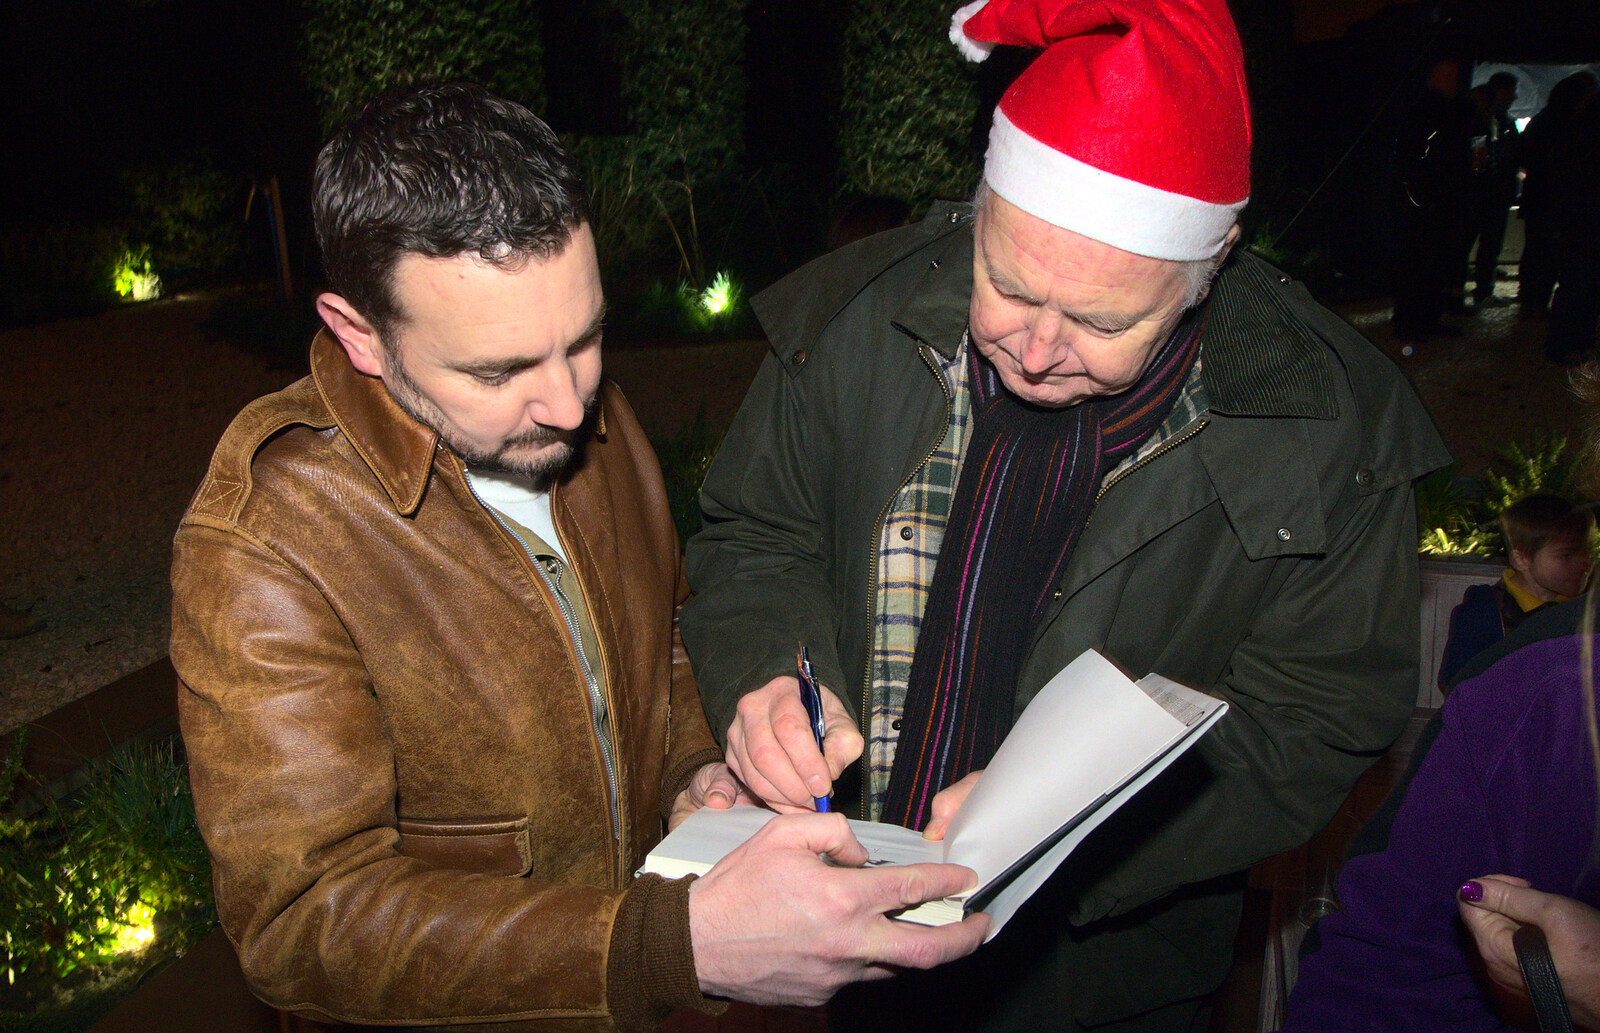 Clive gets a book signed by Ian Lavender from Rick Wakeman, Ian Lavender and the Christmas lights, The Oaksmere, Suffolk - 4th December 2014